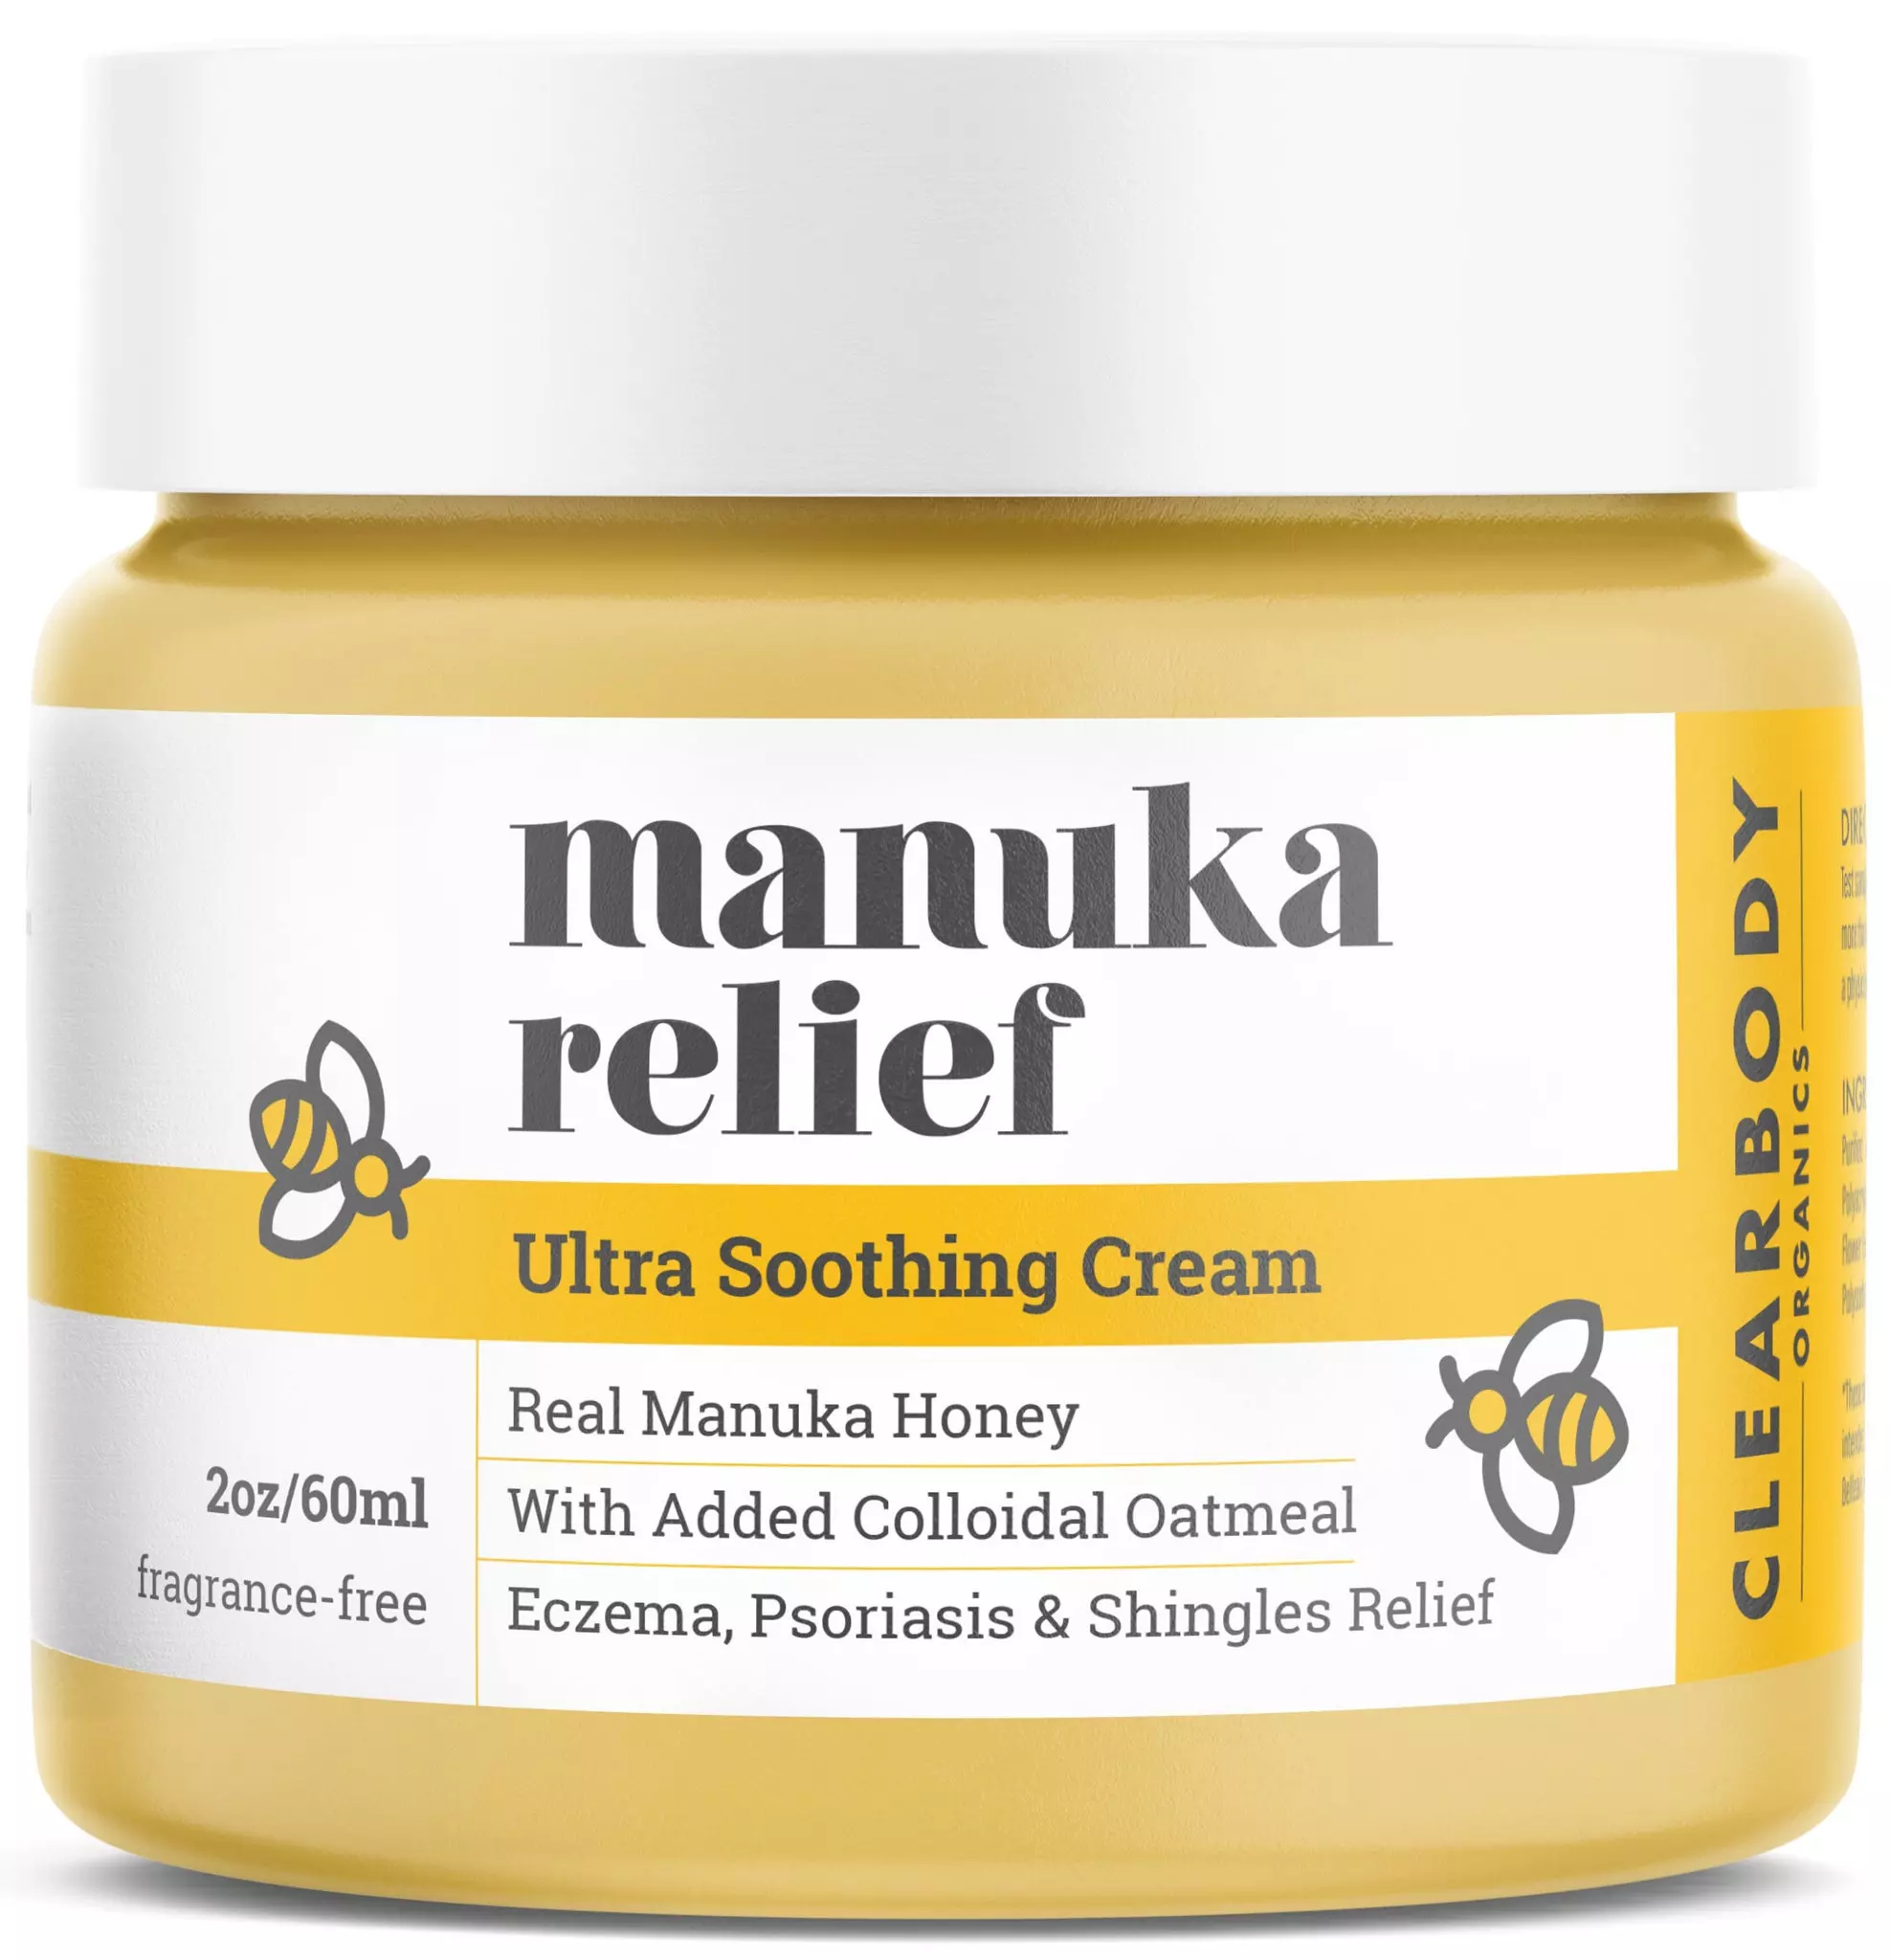 Eczema Psoriasis Cream for Dry Itchy Cracked Irritated Skin- Manuka Honey & Colloidal Oatmeal Treatment for Dermatitis, Shingles, Acne, Rosacea- Natural Anti-itch Relief for Kids, Adults, Baby Eczema